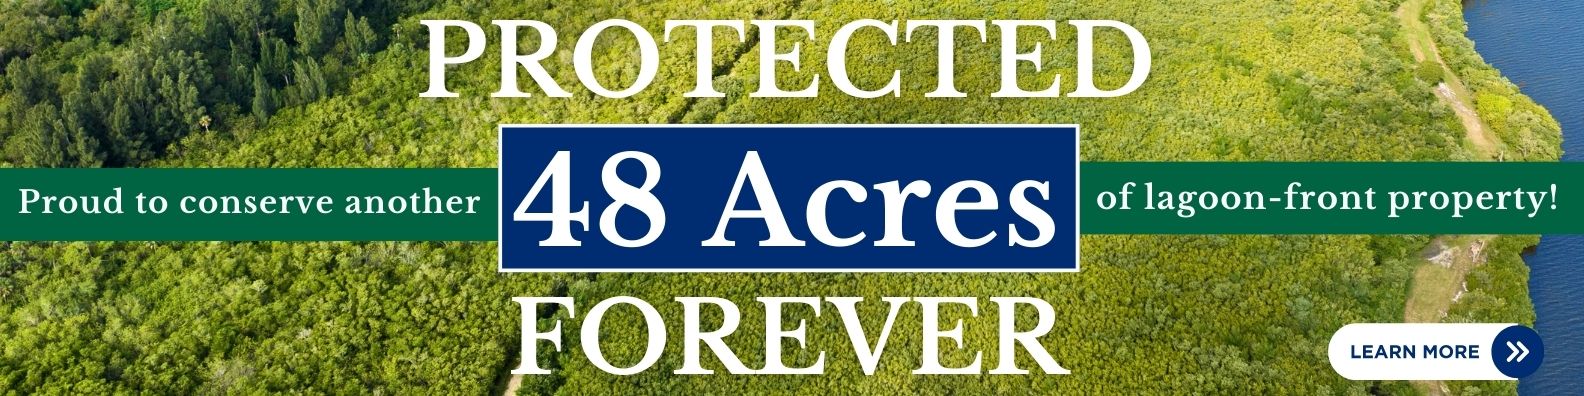 Protected 48 Acres Forever